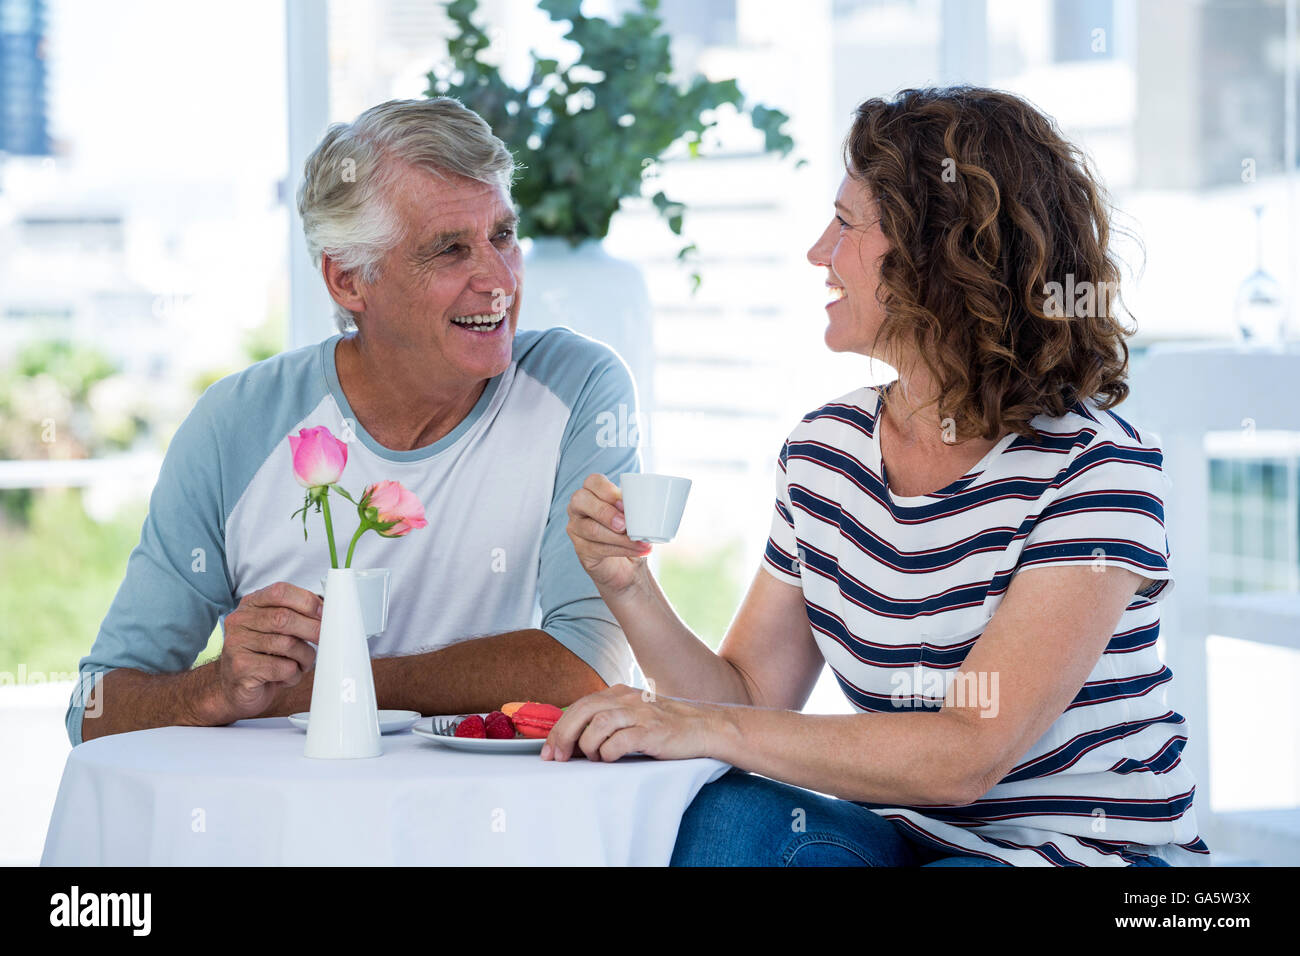 Smiling couple talking while sitting at restaurant Stock Photo